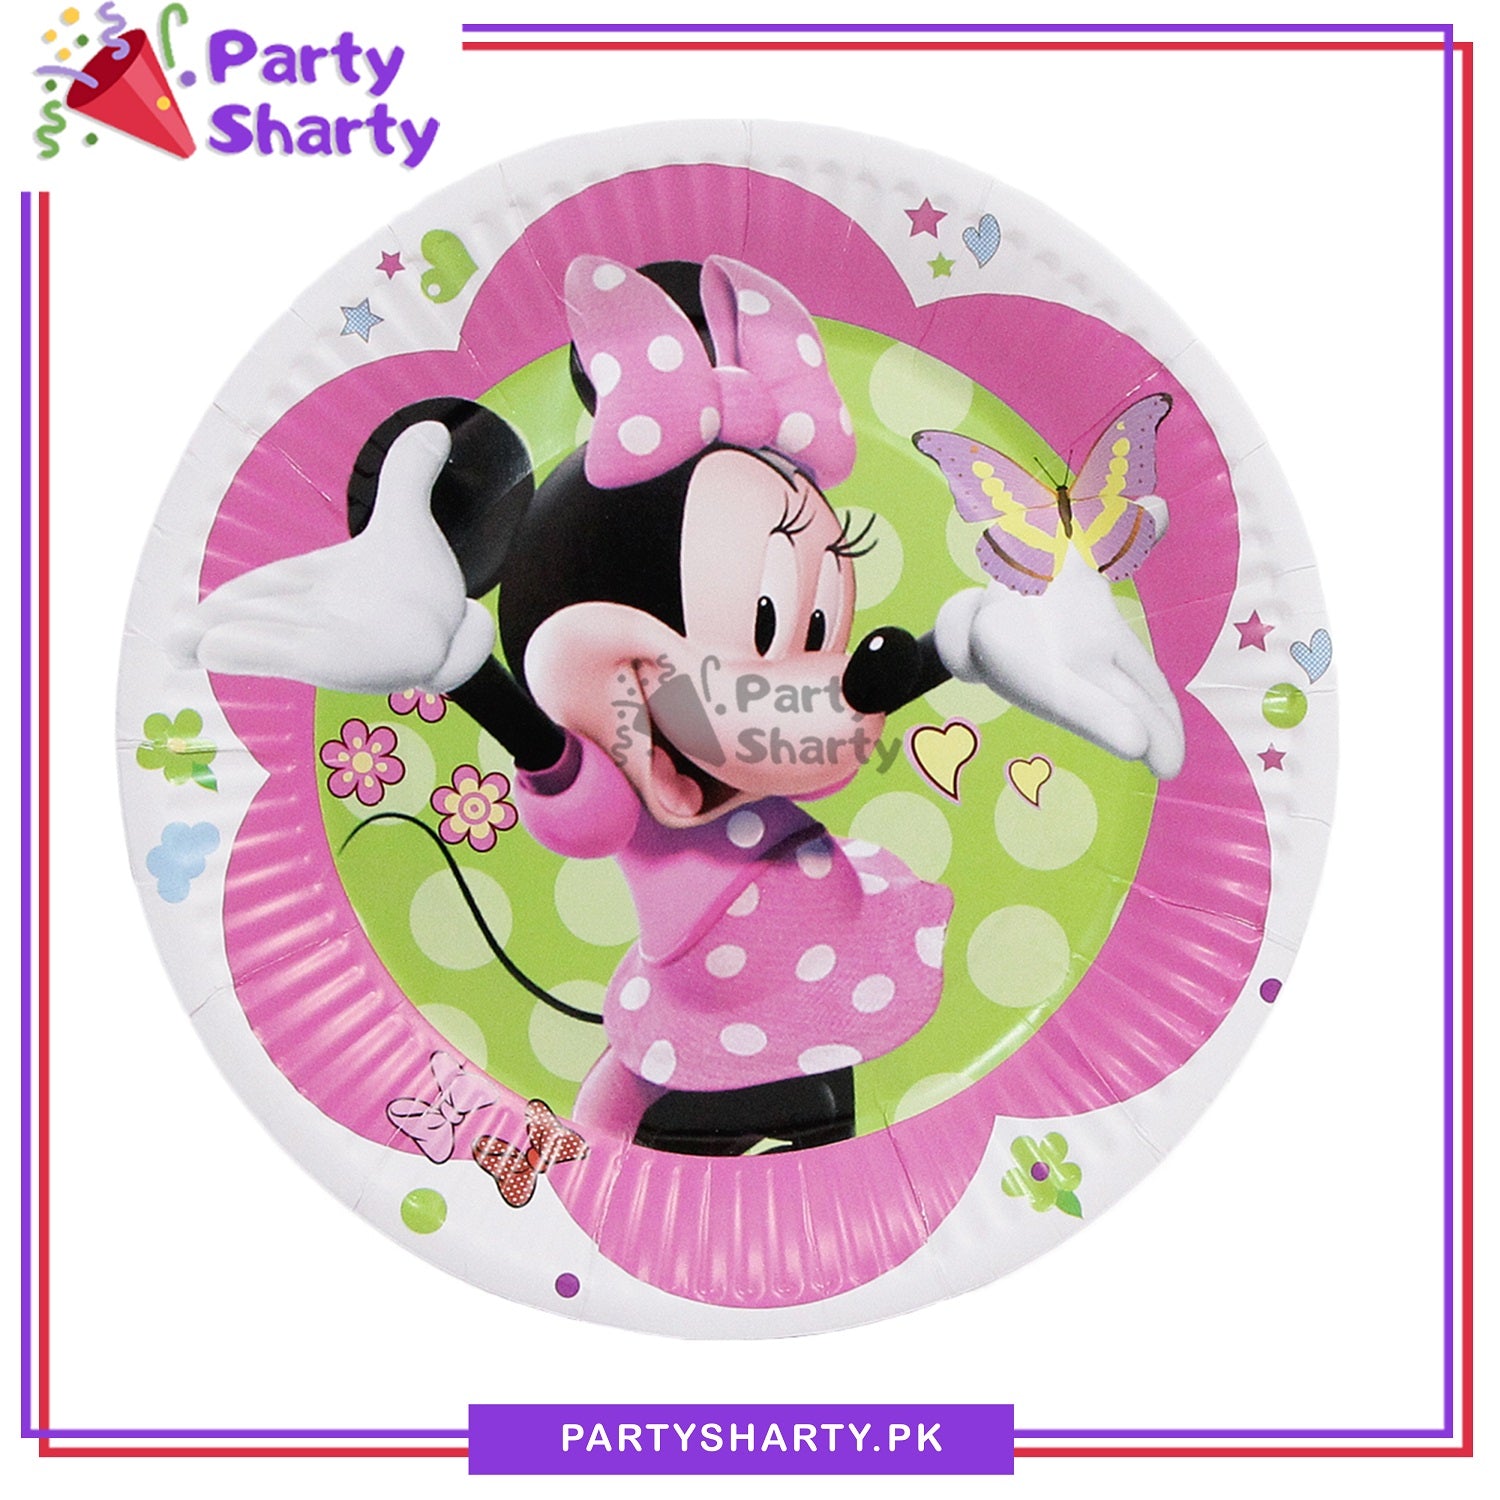 Minnie Mouse Theme Party Disposable Paper Plates for Minnie Mouse Theme Party and Decoration